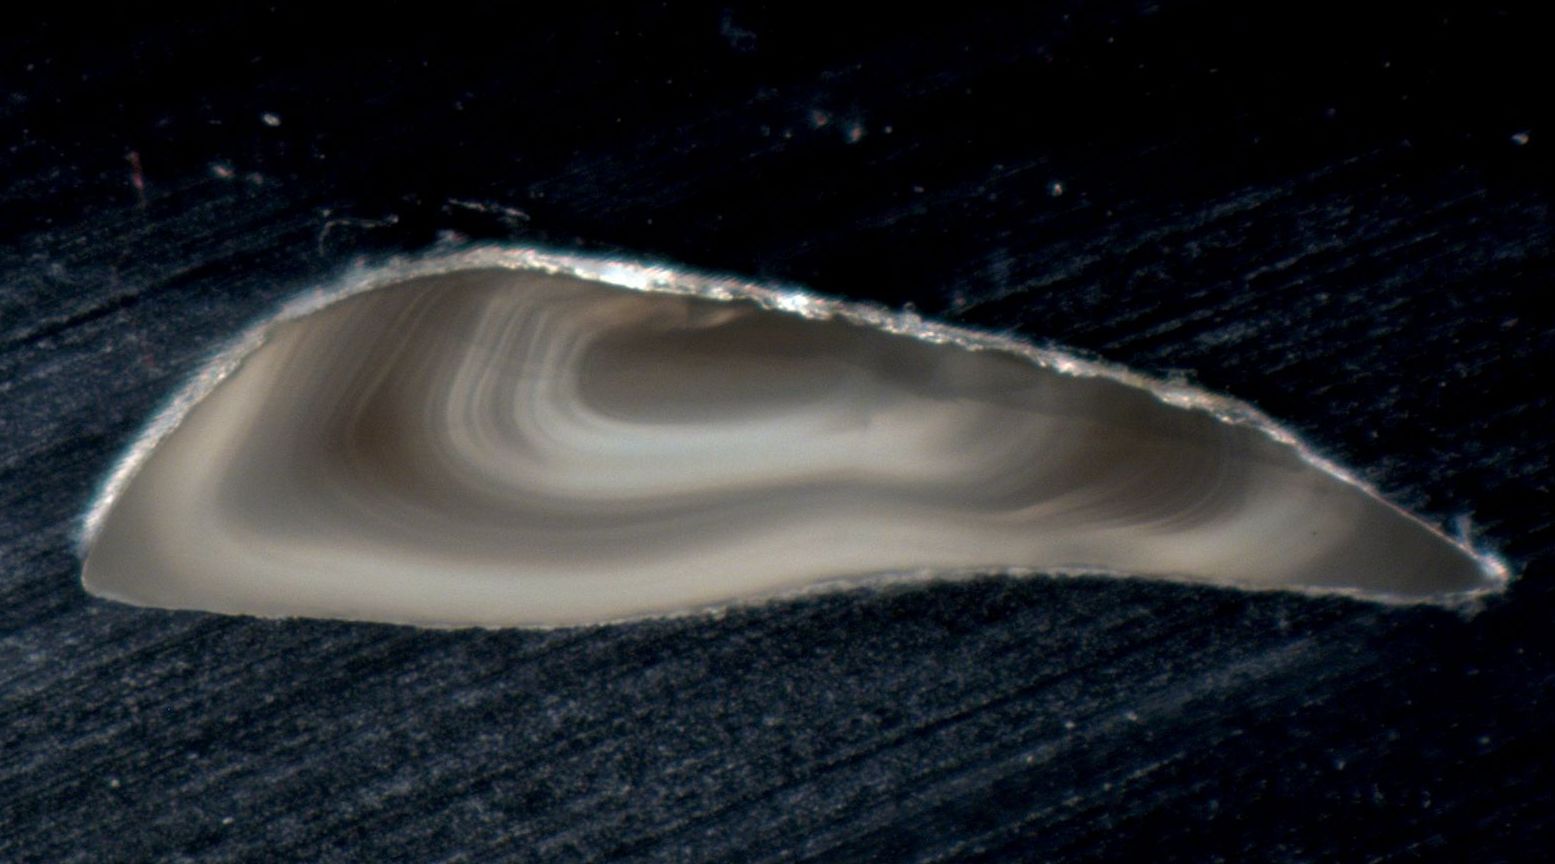 Thin slice, cod otolith from cormorant spit balls. Stomach acid has etched the surface, but ring structure is still very recognizable. † November 2019, two bright summer rings, age: one